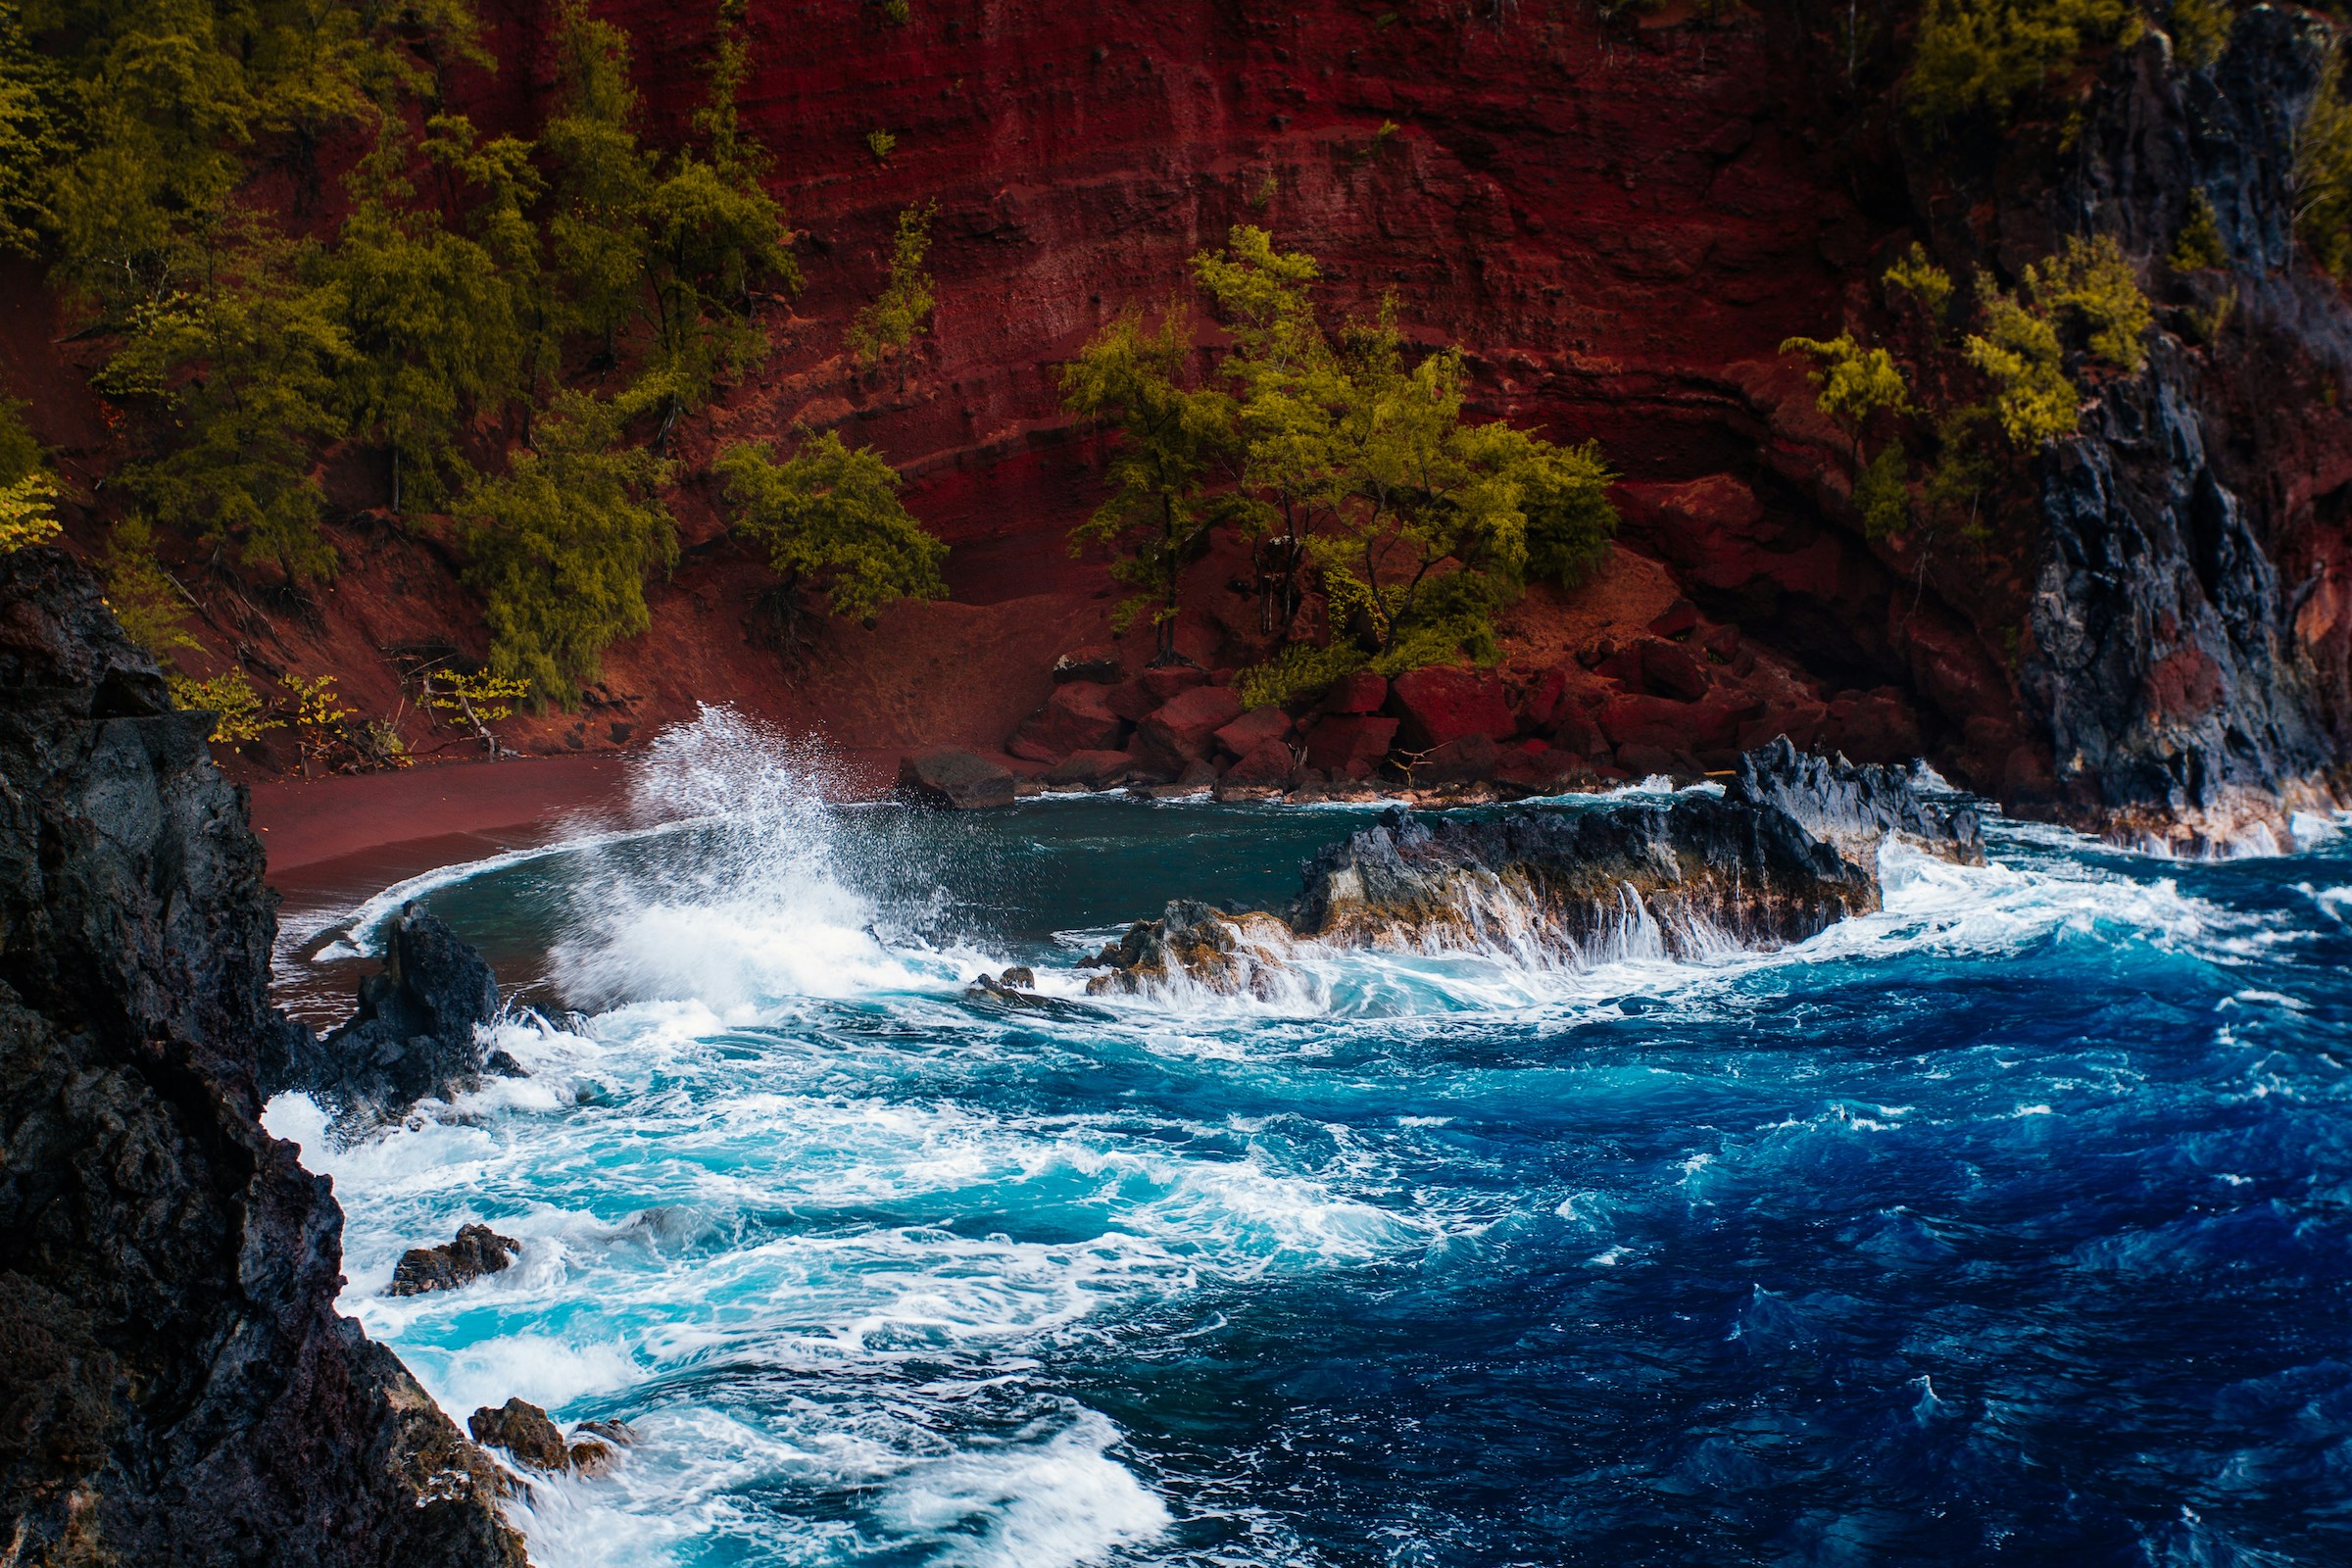 Waves crashing against a red sand beach with lush trees on a rugged coastline.